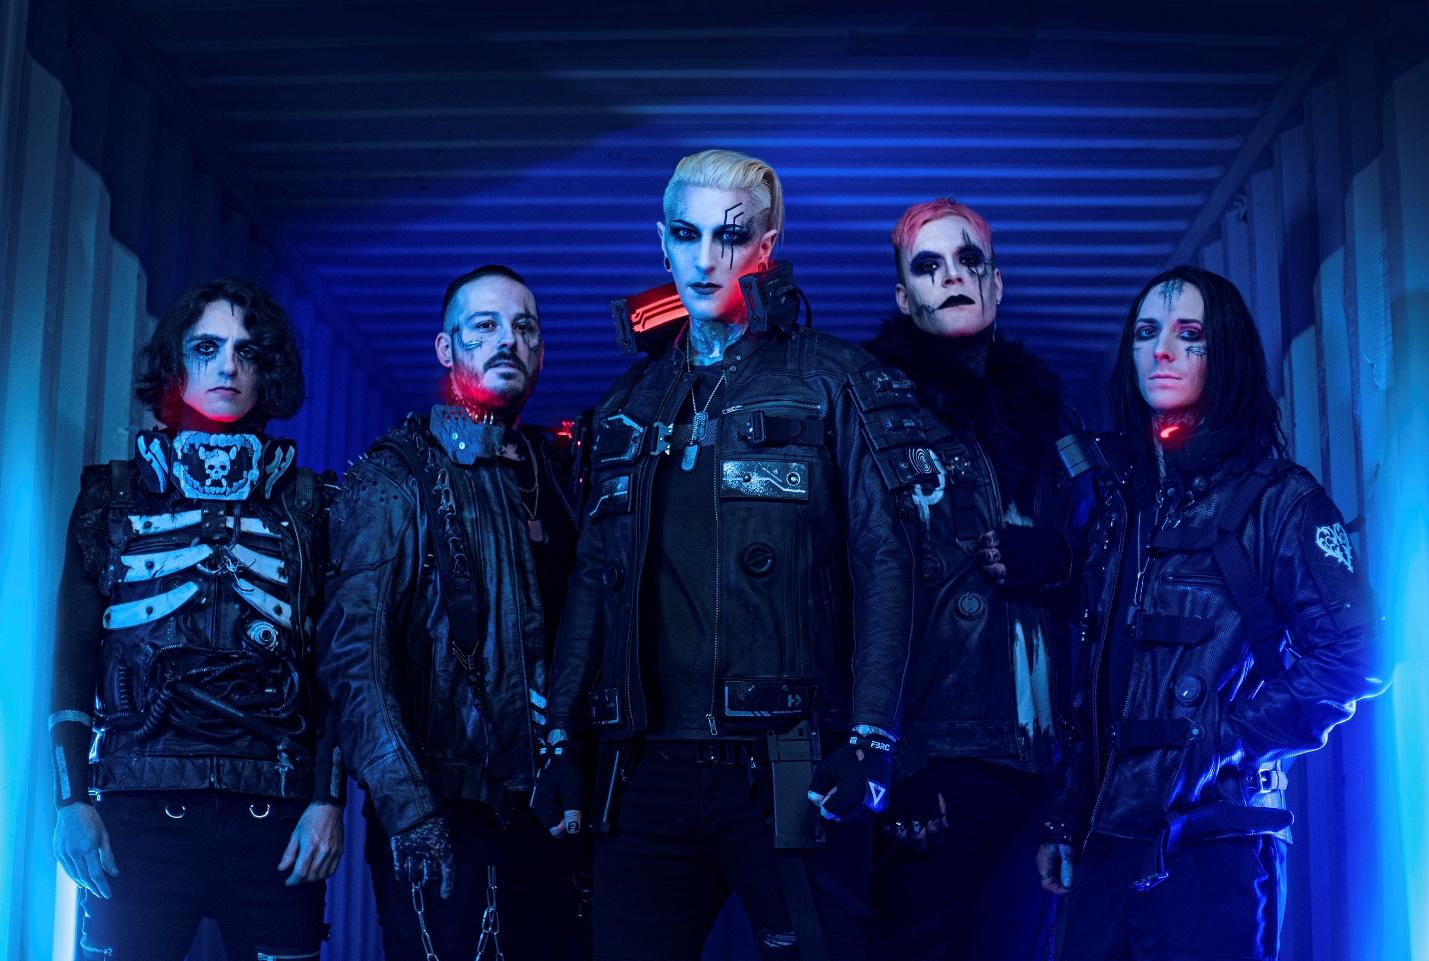 MOTIONLESS IN WHITE SHARE NEW SONG “SCORING THE END OF THE WORLD” FEAT. RENOWNED VIDEO GAME COMPOSER MICK GORDON